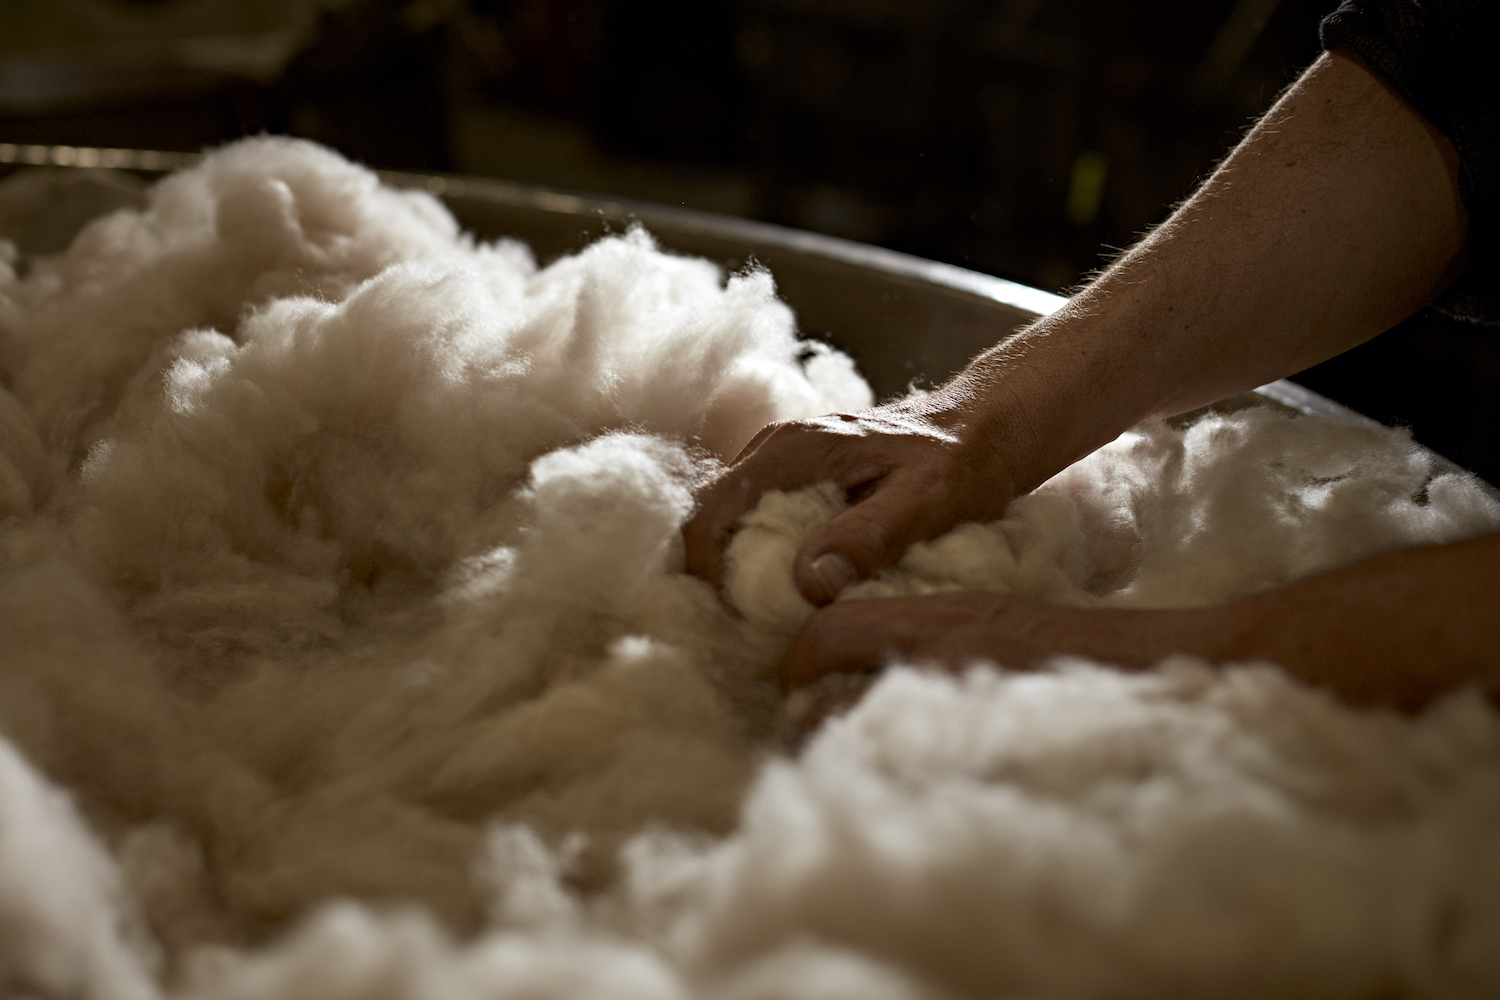 Johnstons of Elgin purchases most of its Cashmere from sources certified by the Sustainable Fibre Alliance and by 2024 aims to buy 100% of its fibre from SFA-certified sources. © Johnstons of Elgin